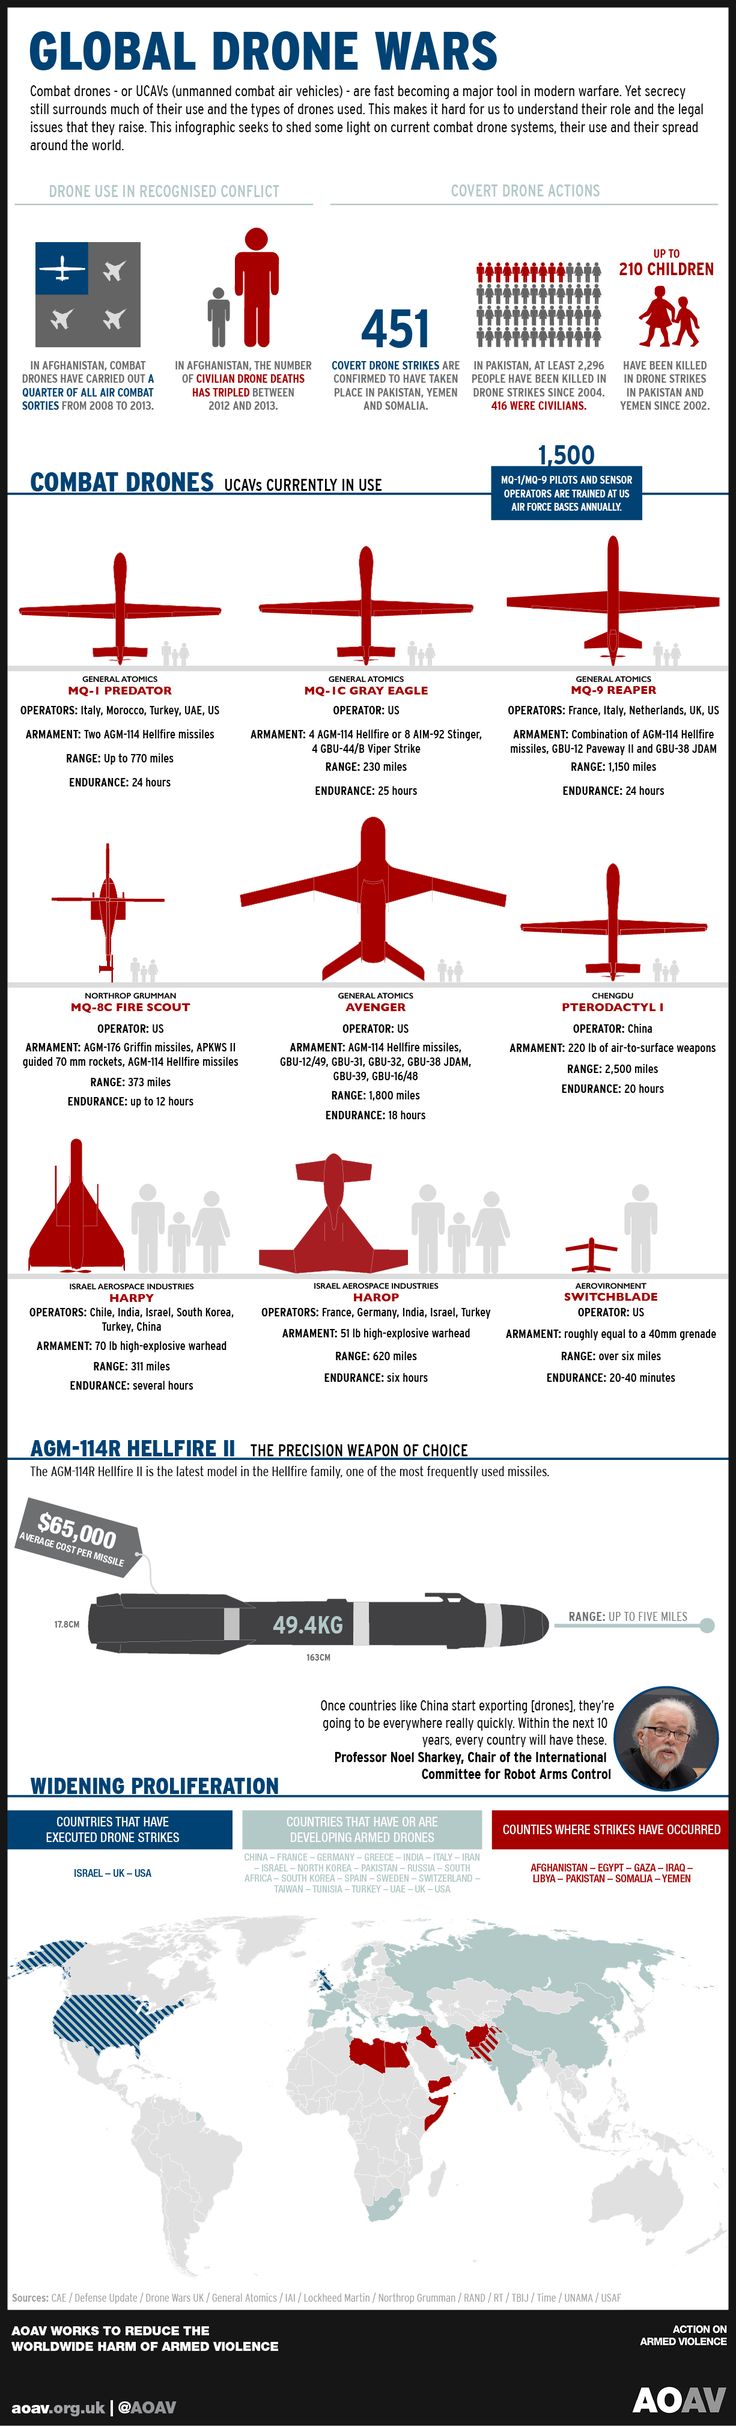 Infographic: current combat drones & their proliferation